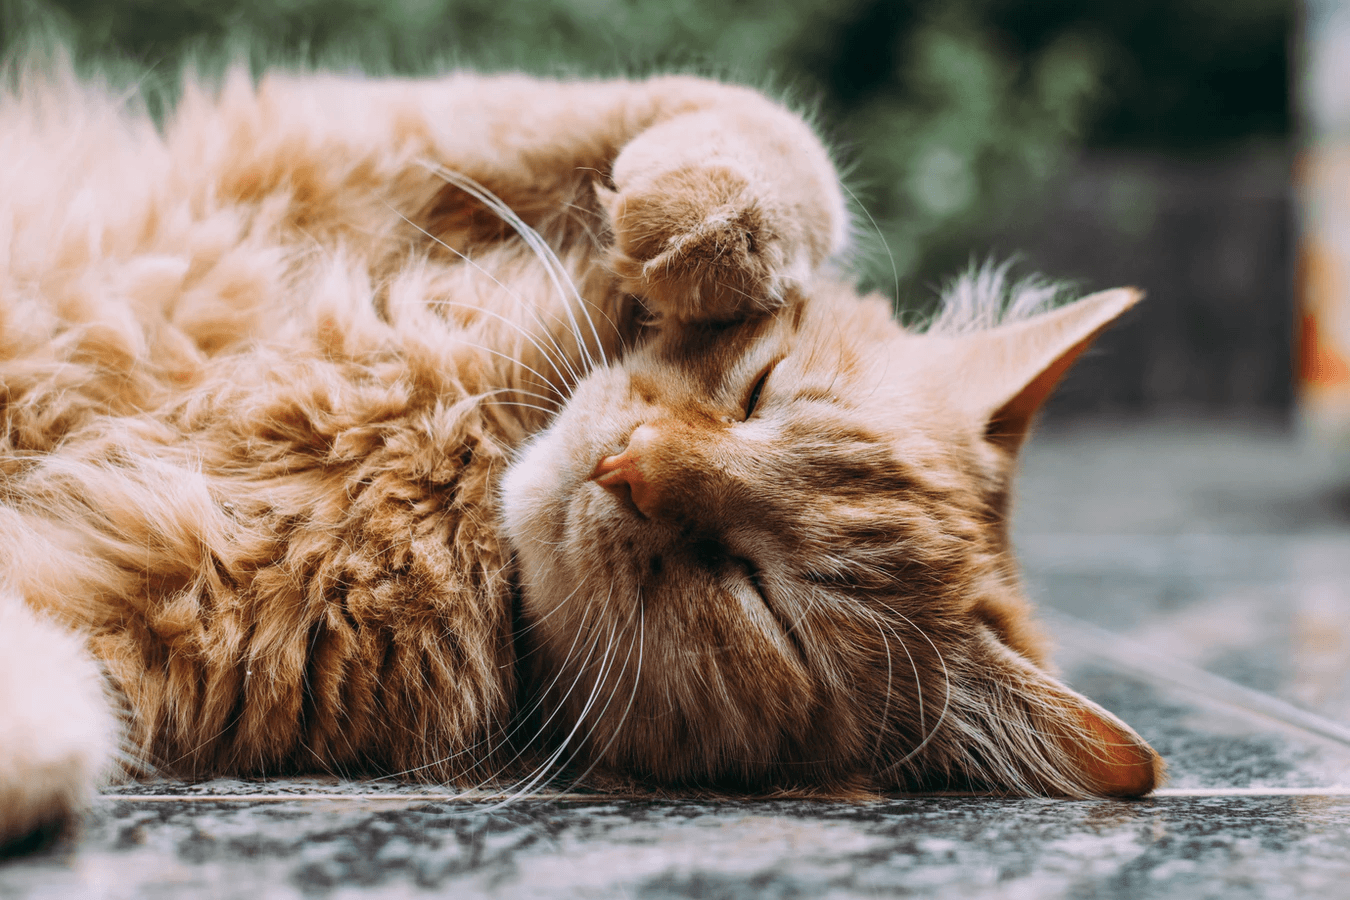 Cat Allergies in Humans: Symptoms and Treatment